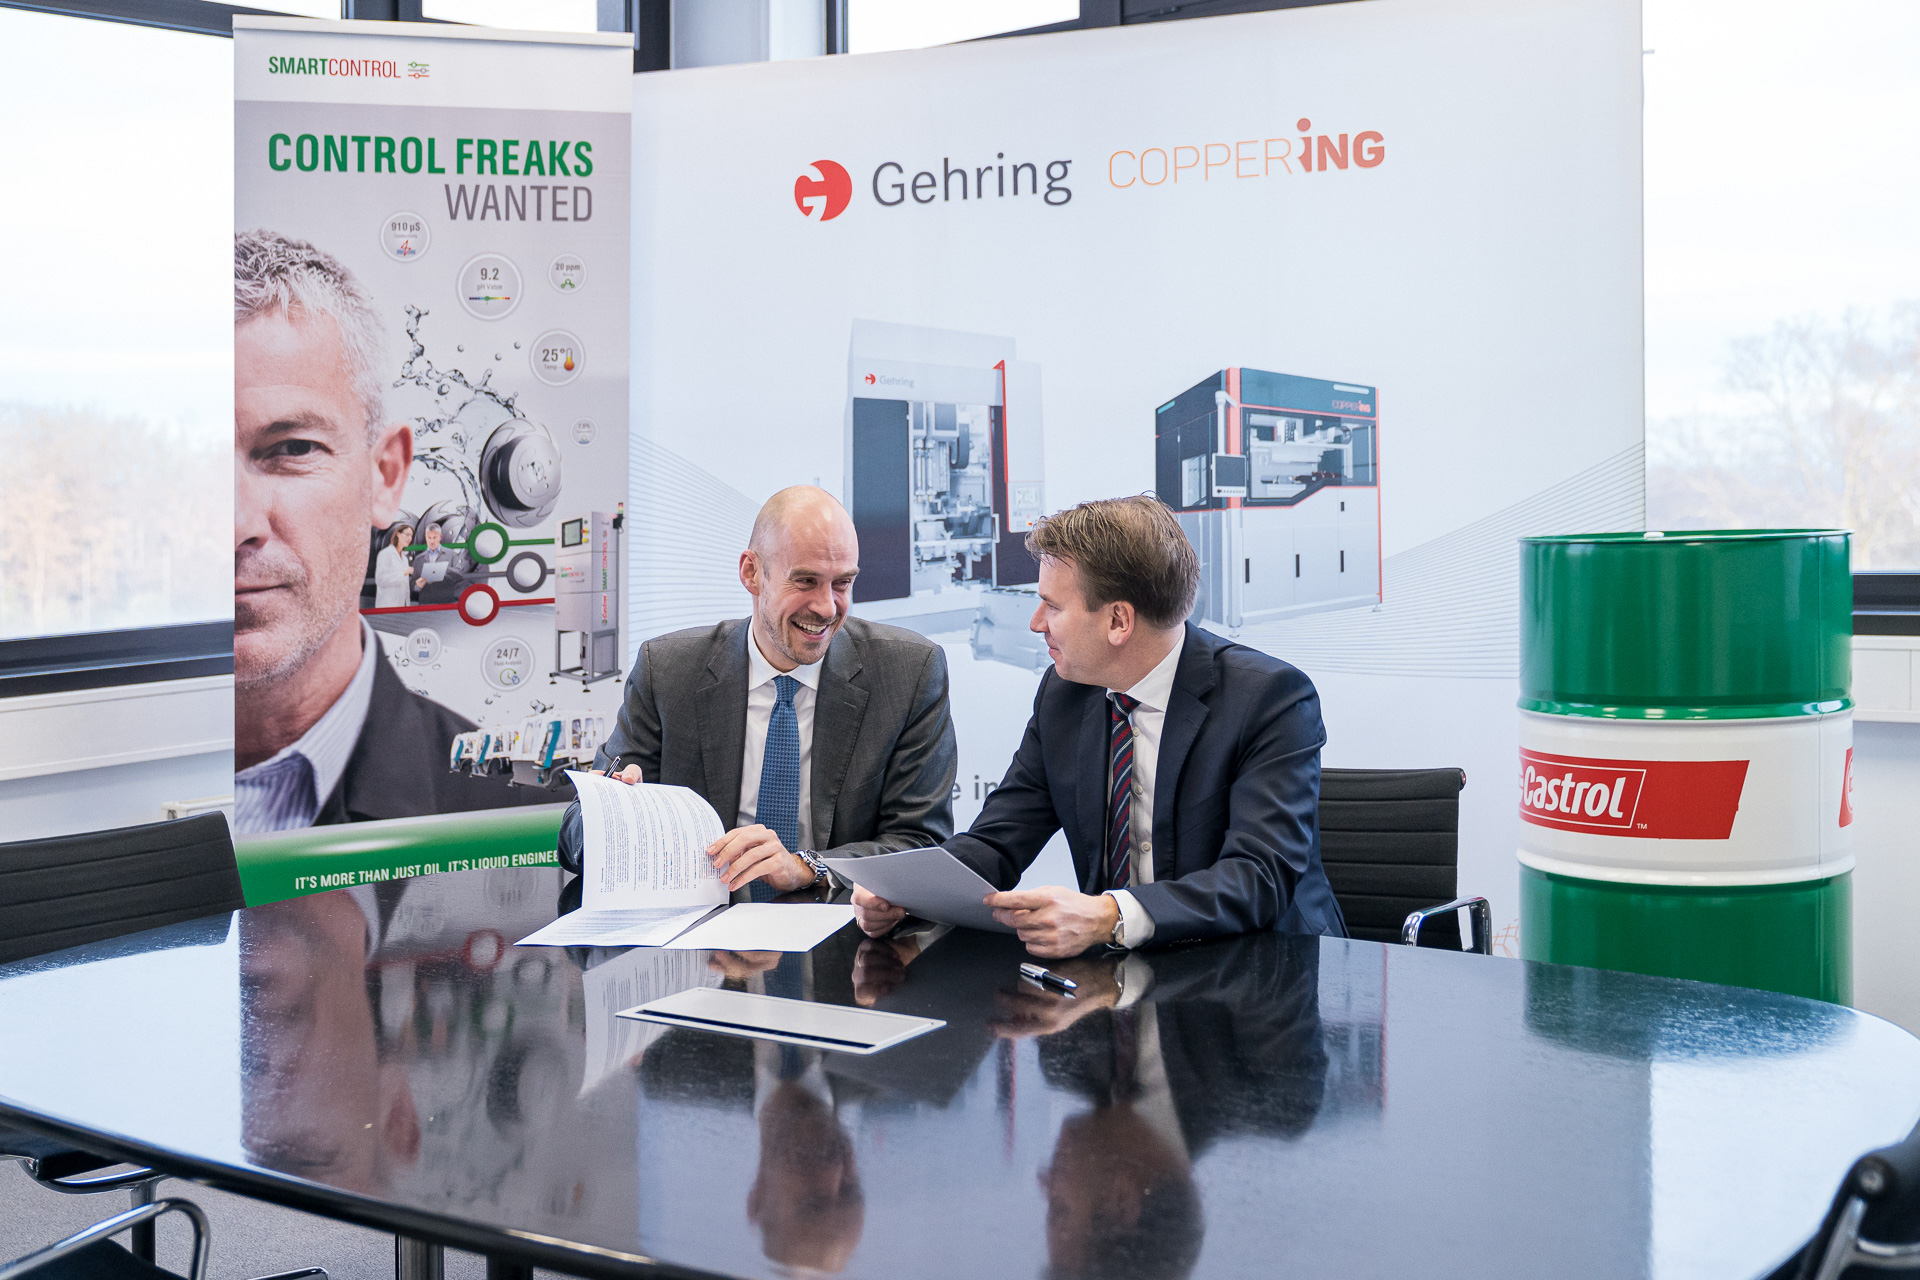 Andreas Osbar, Castrol board member, and Dr. Sebastian Schöning, CEO of the Gehring Group, signed the cooperation agreement